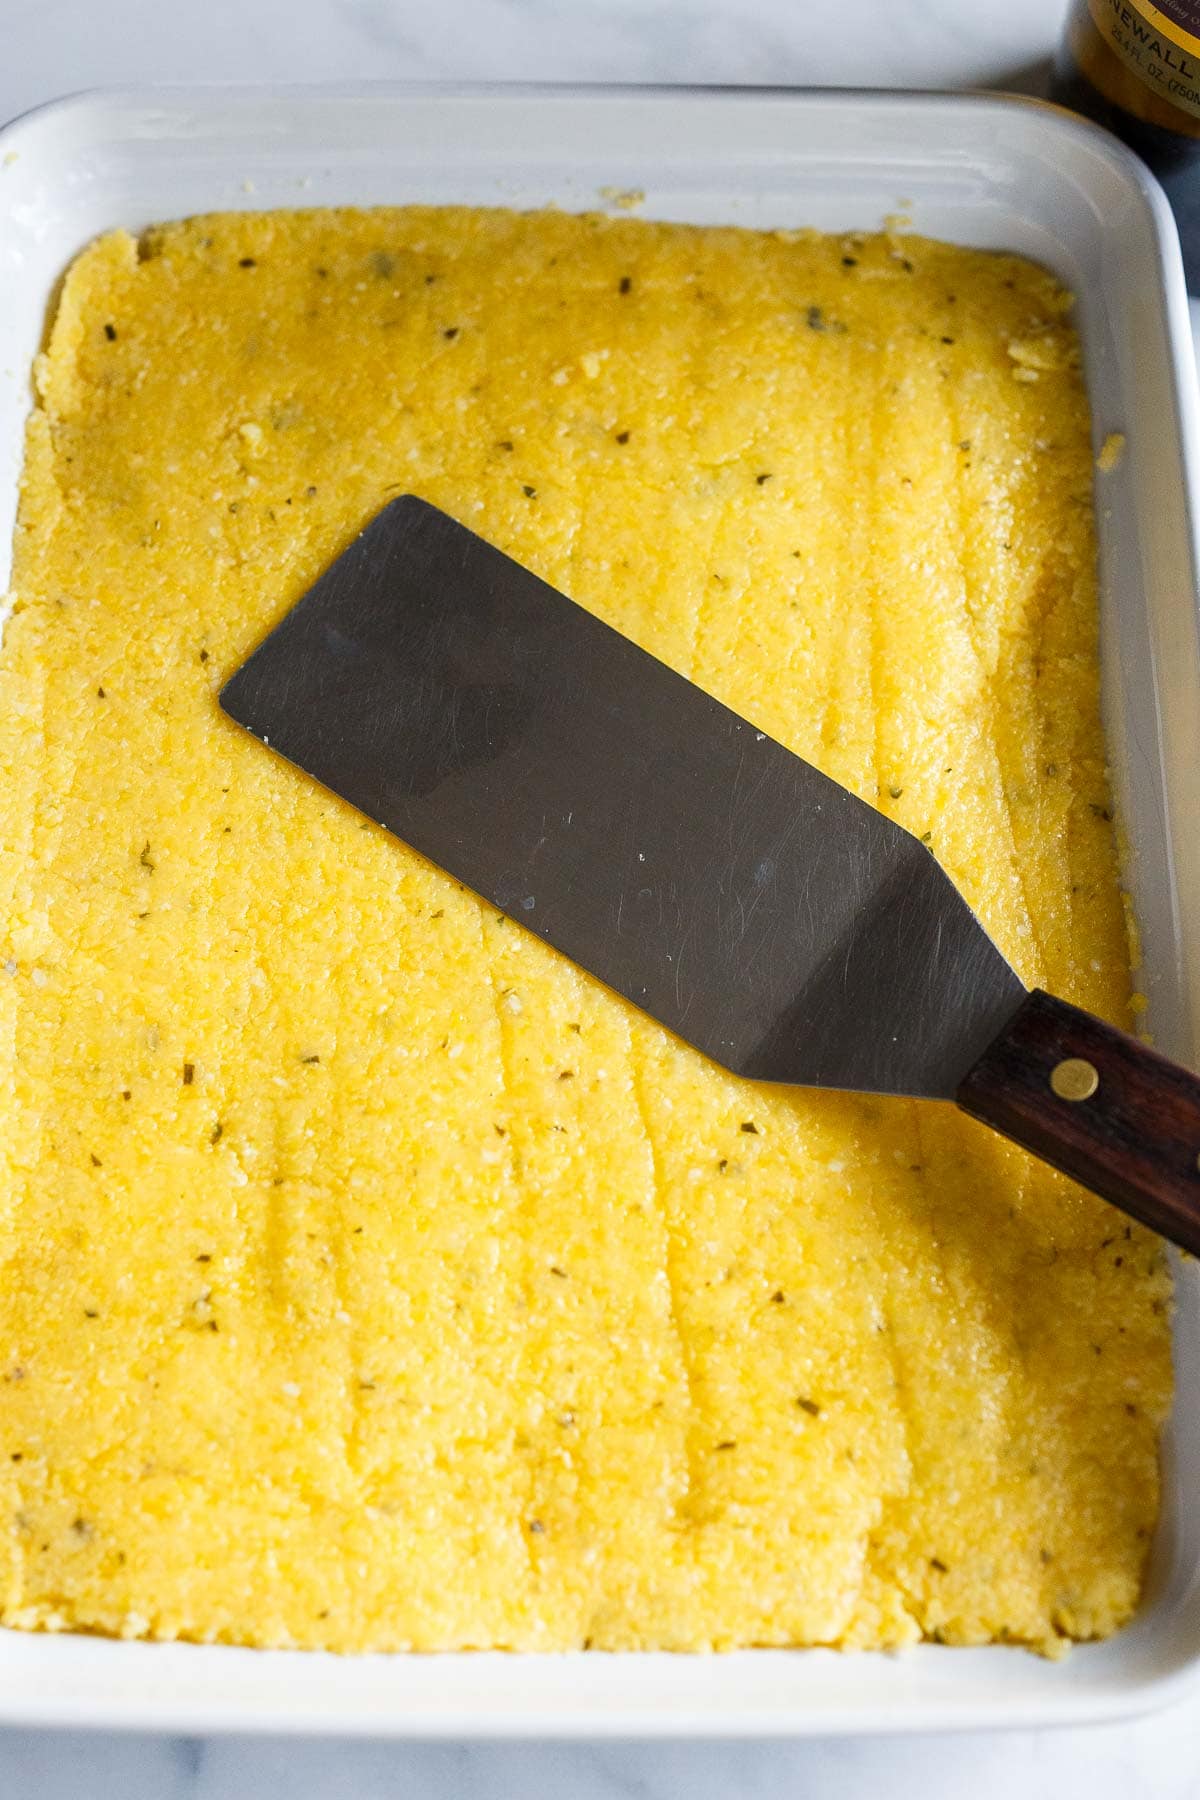 Smooth polenta in a pan with a metal spatula.